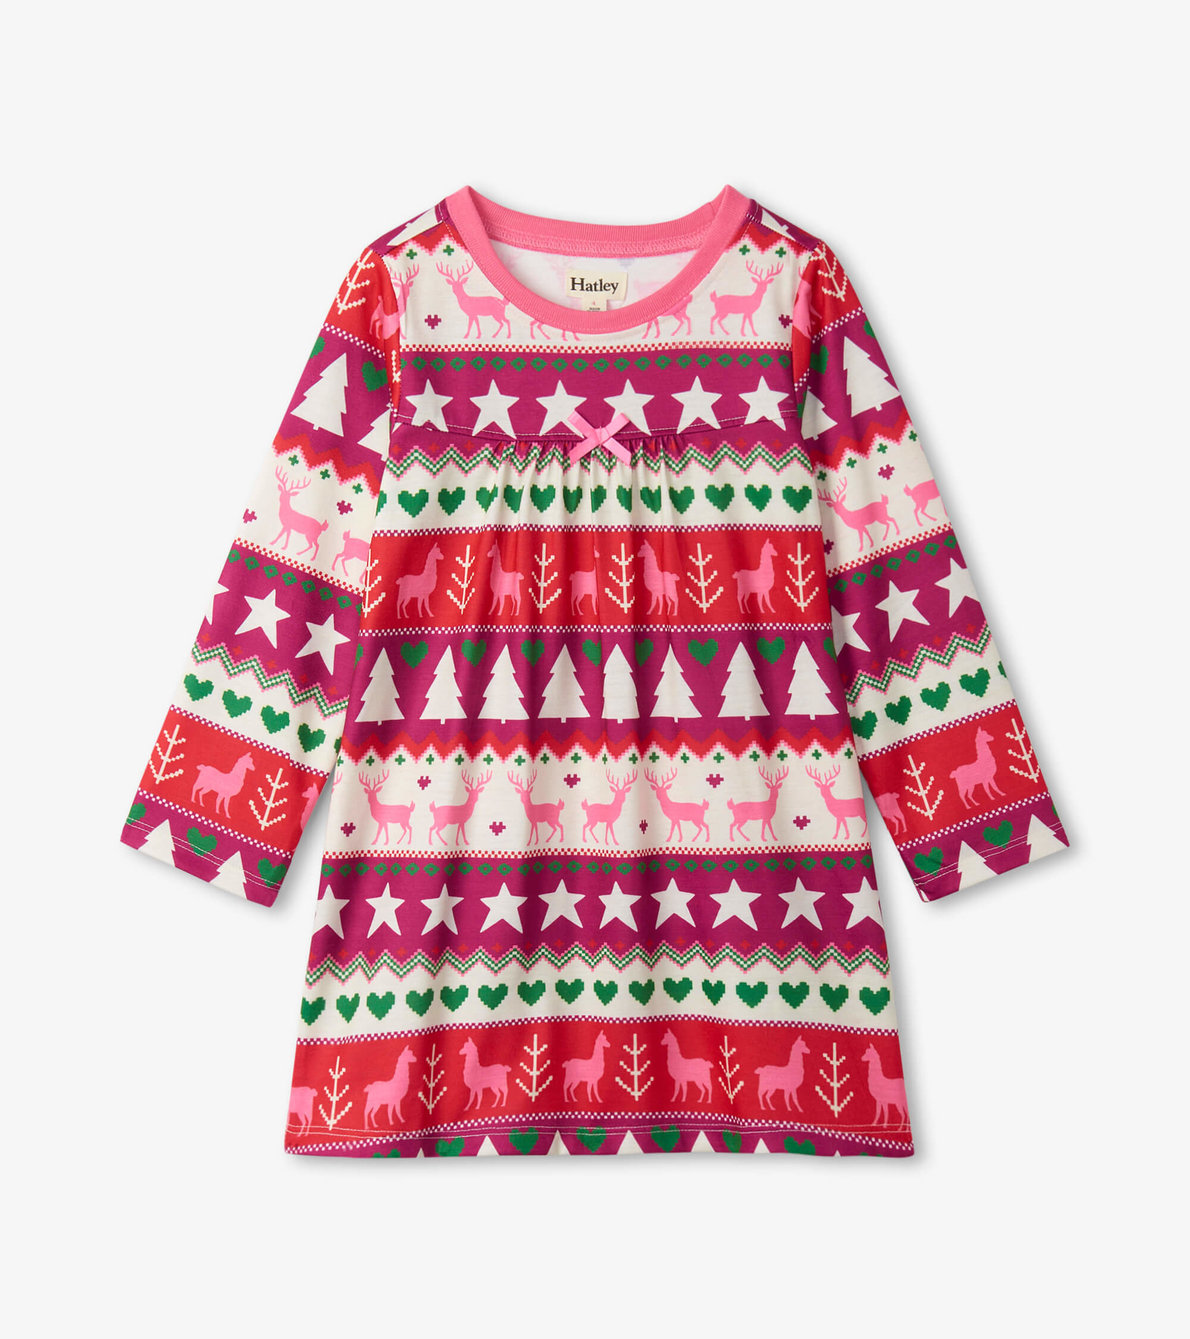 View larger image of Holiday Fair Isle Long Sleeve Girls Nightgown